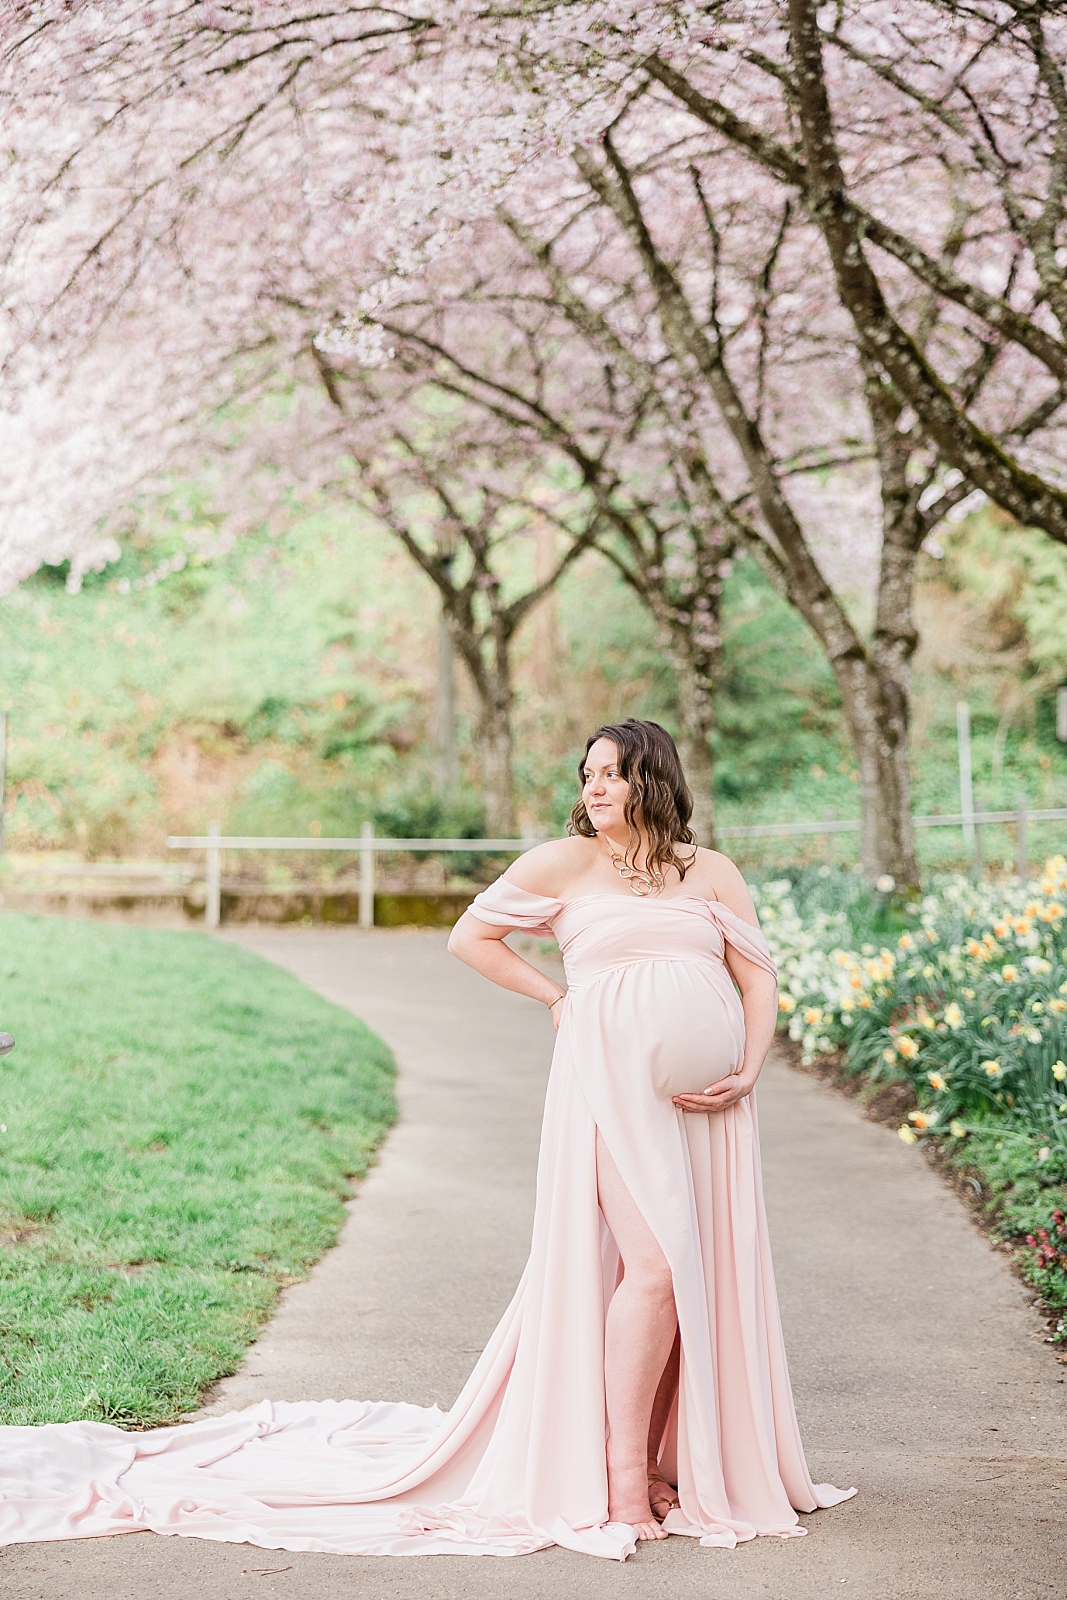 Pregnant woman standing in a garden OHSU Center for Womens Health